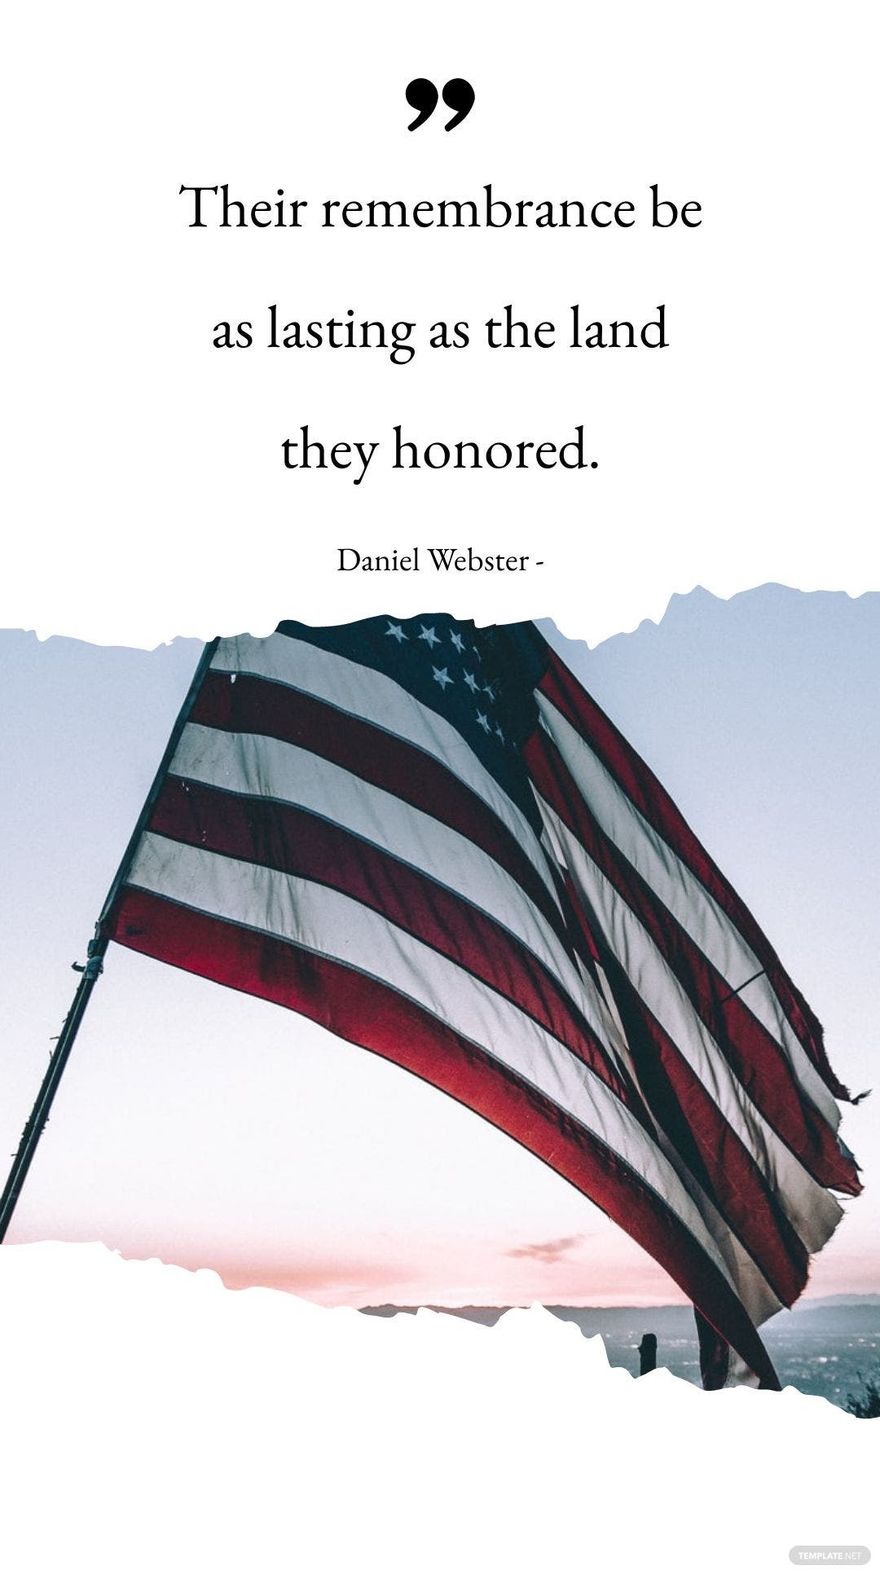 Daniel Webster - Their remembrance be as lasting as the land they honored.